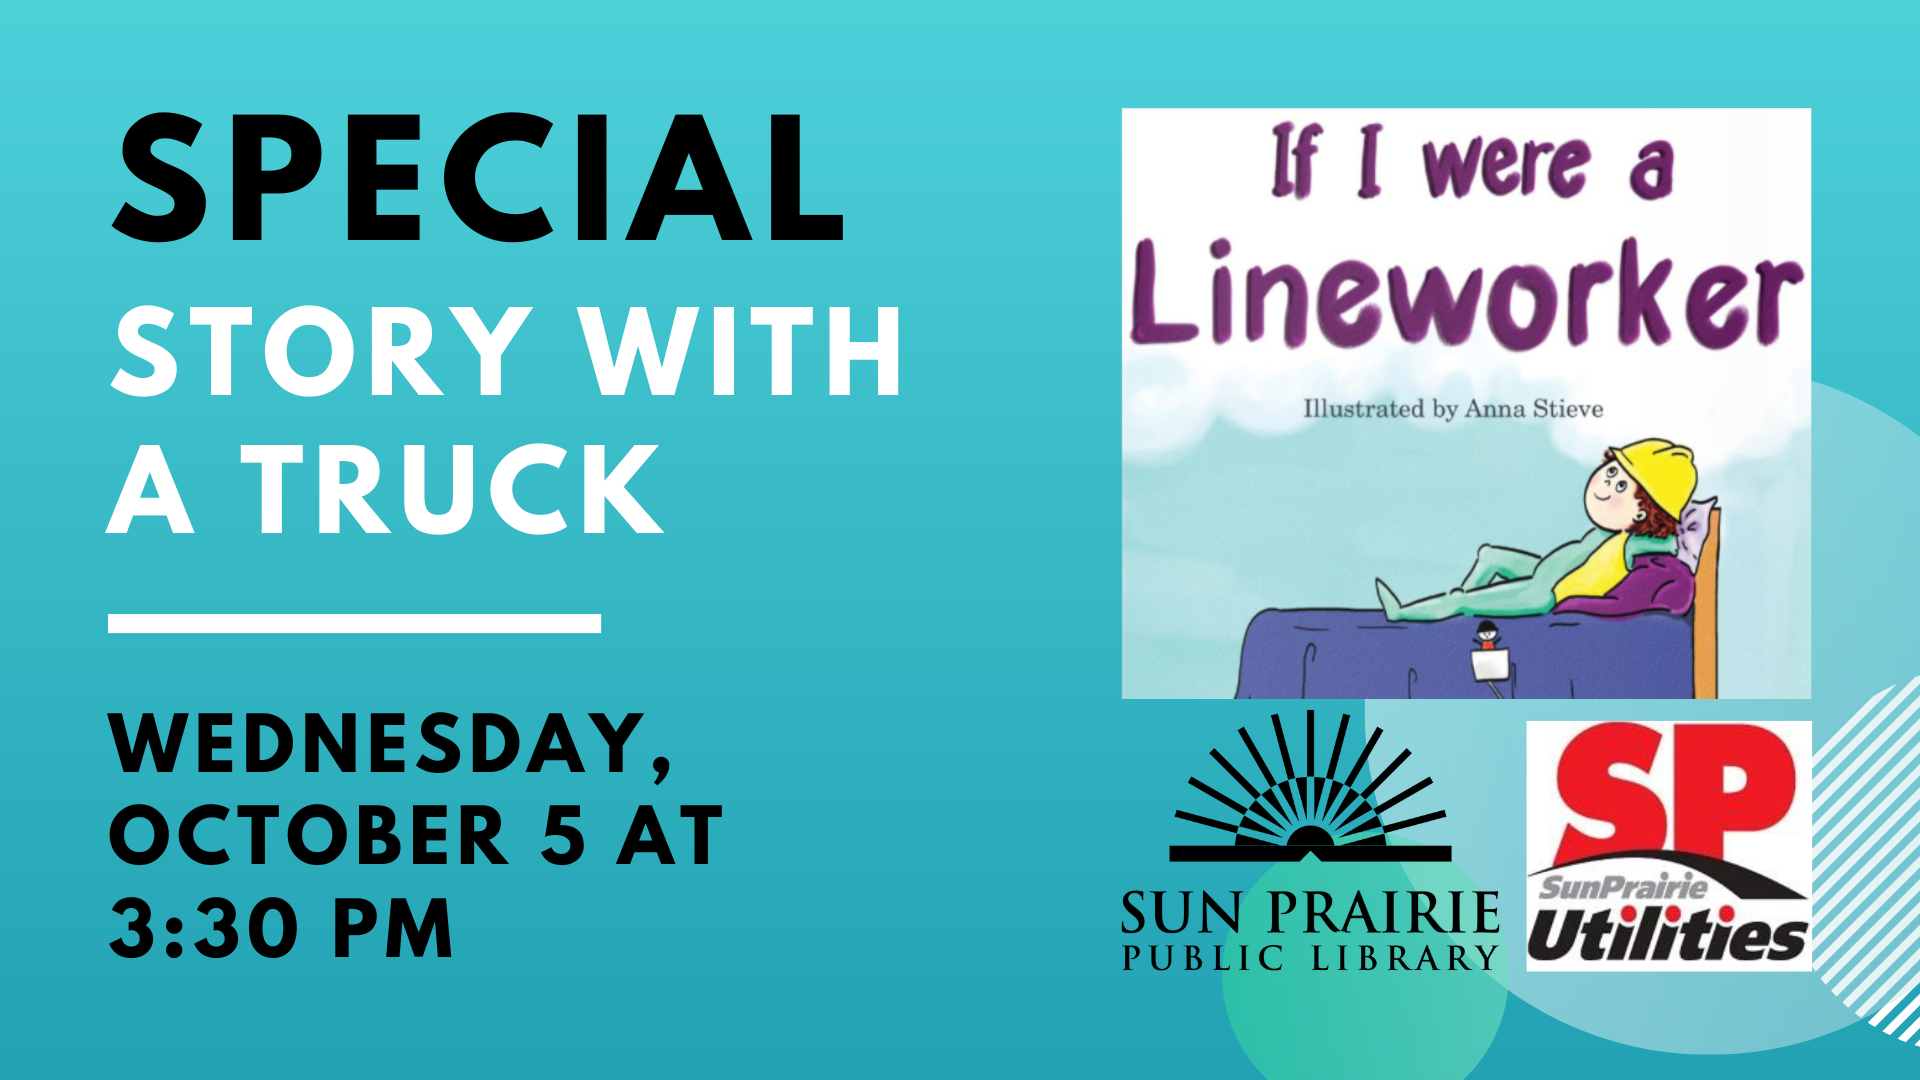 Special Story with a Truck, image of the book "If I were a Lineworker"